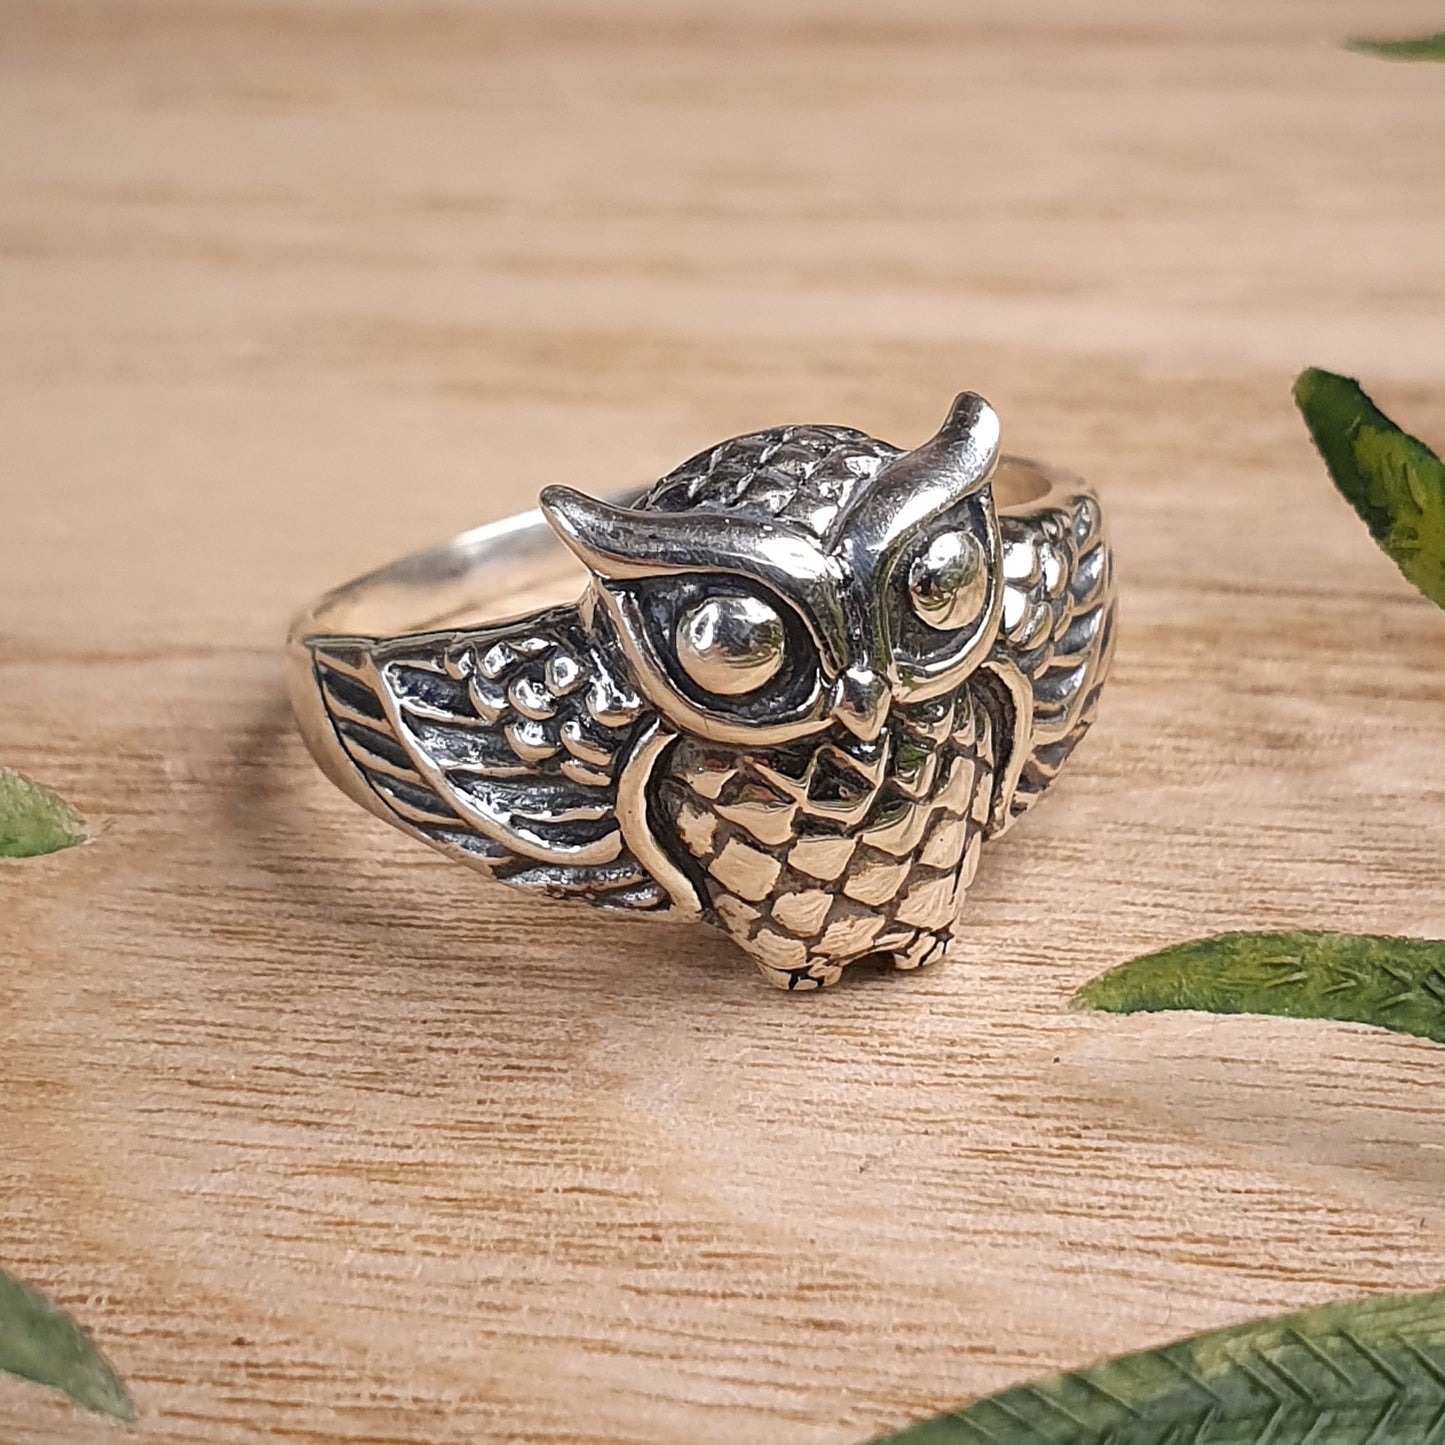 Owl Ring - Size 9 / S (ZX383)